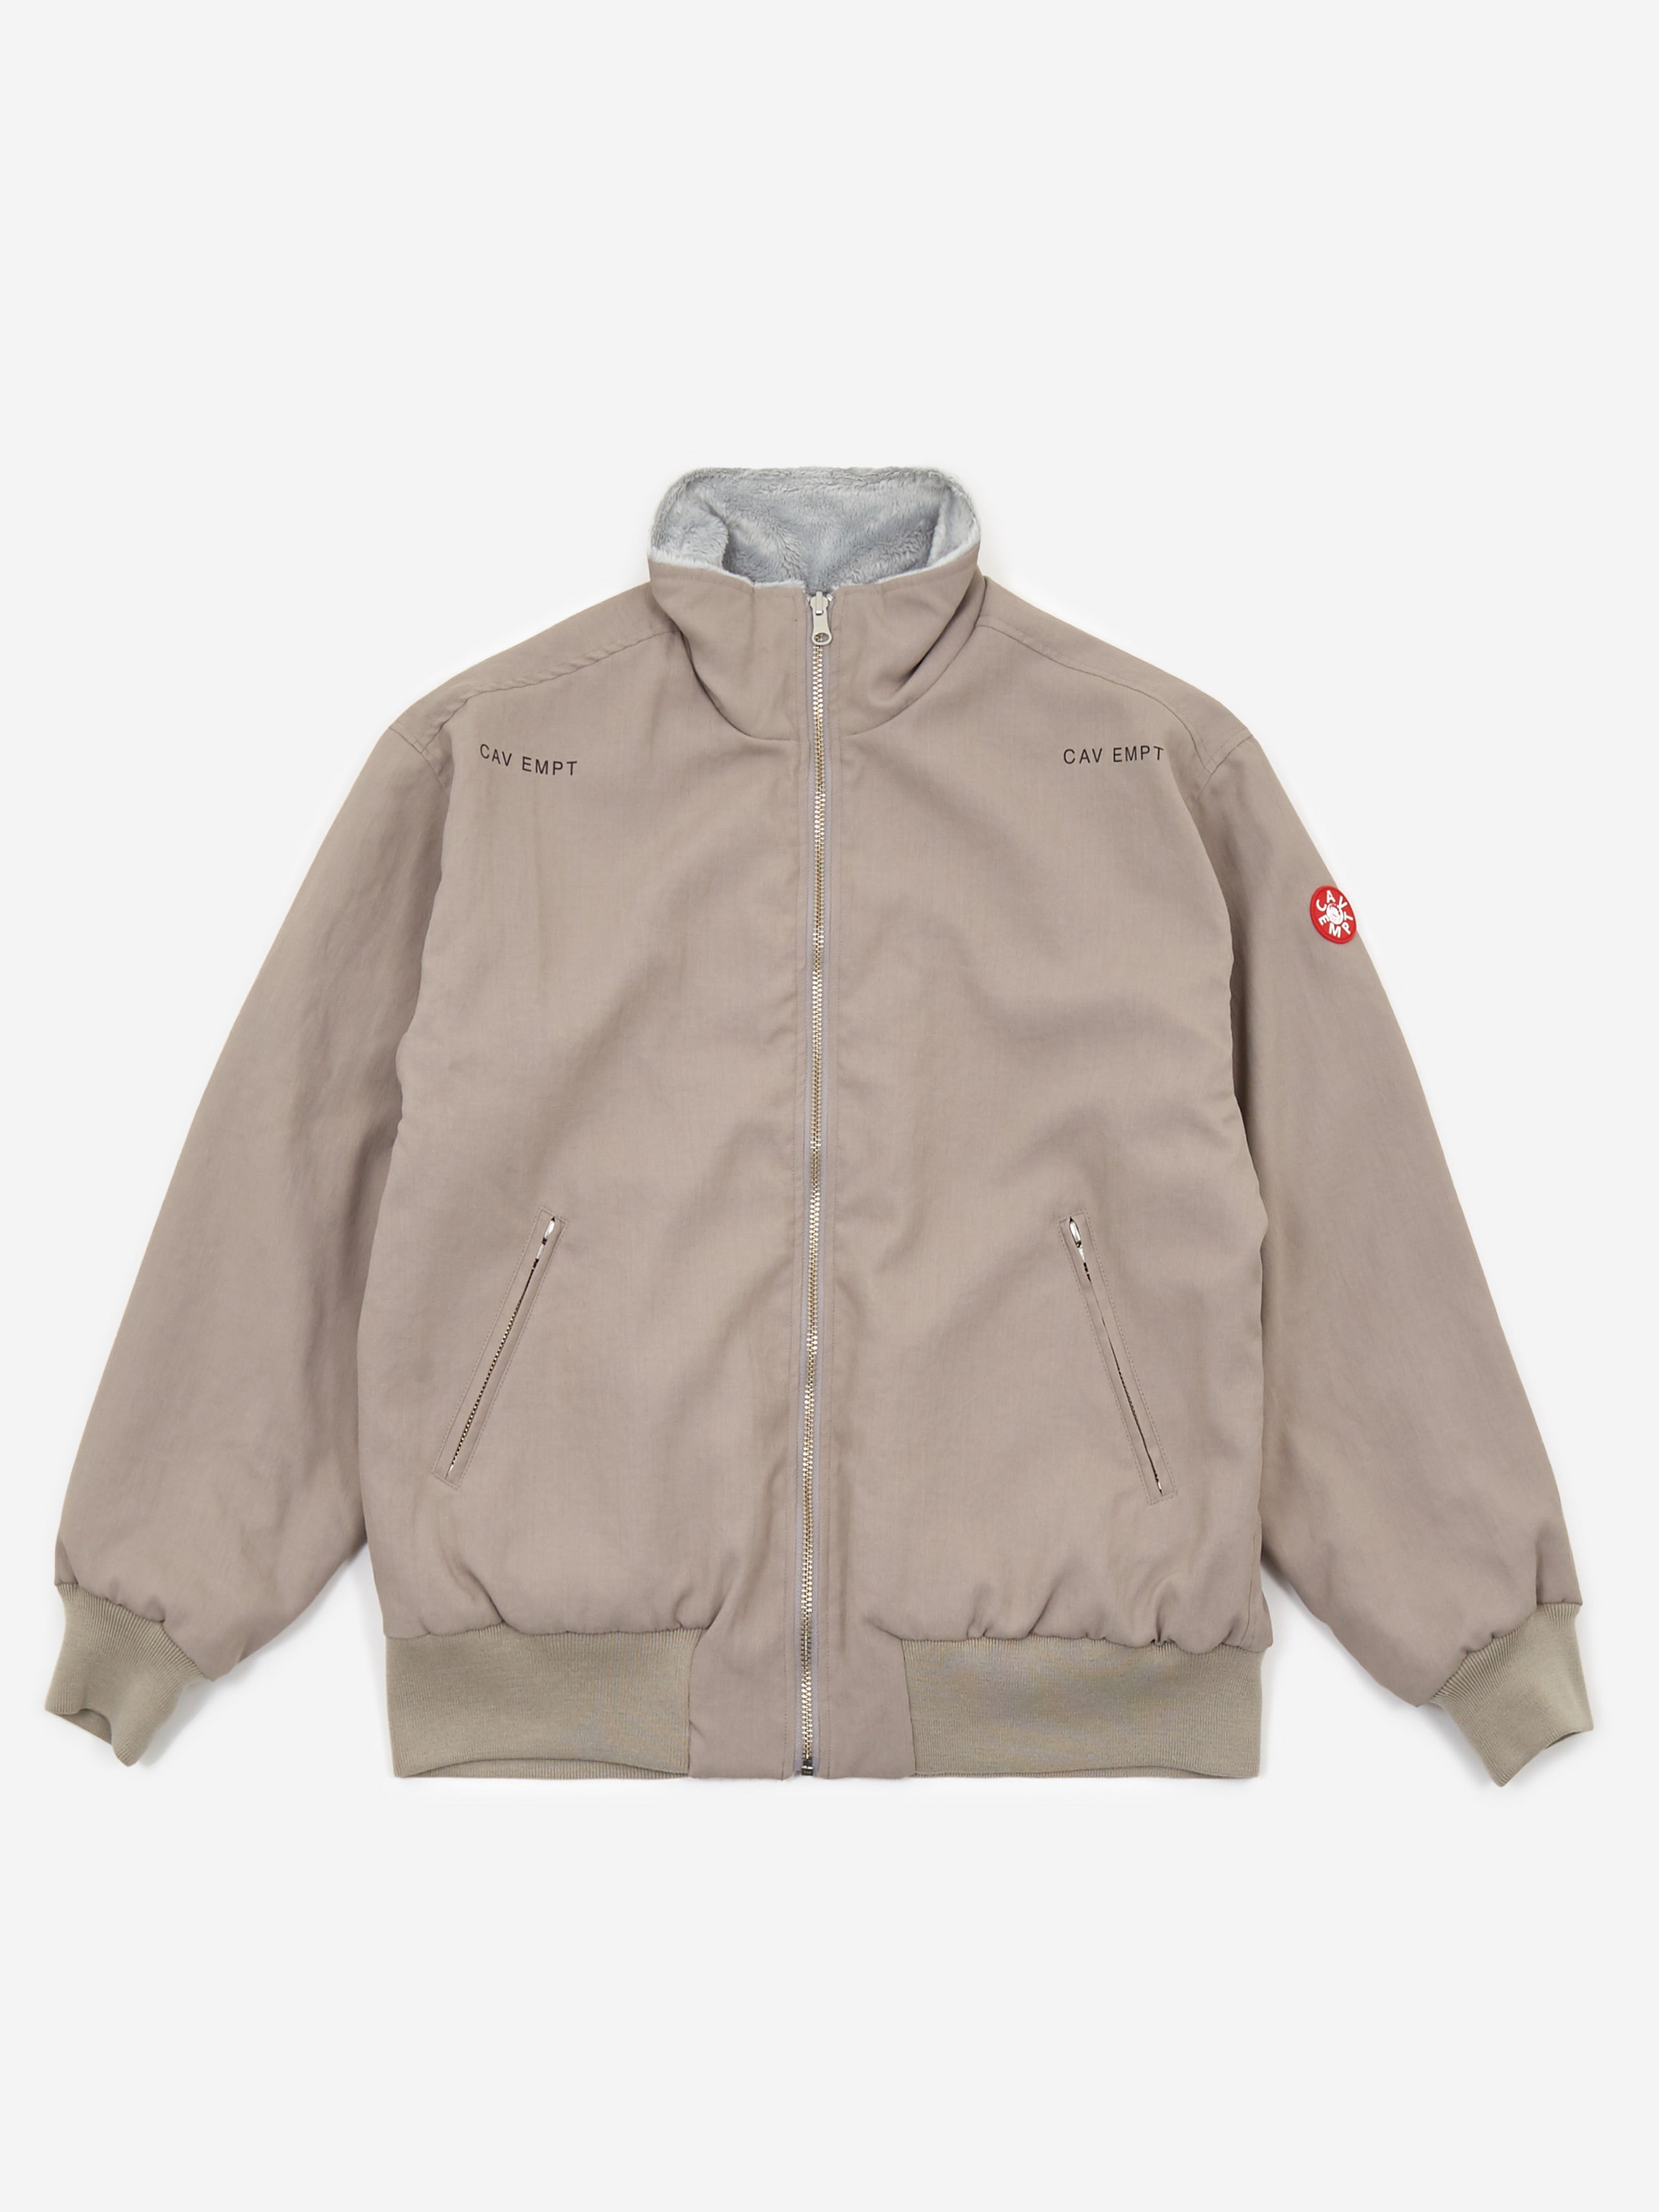 SOOK: Shopping Discovery: Find & Buy Direct: C.E Cav Empt Ash